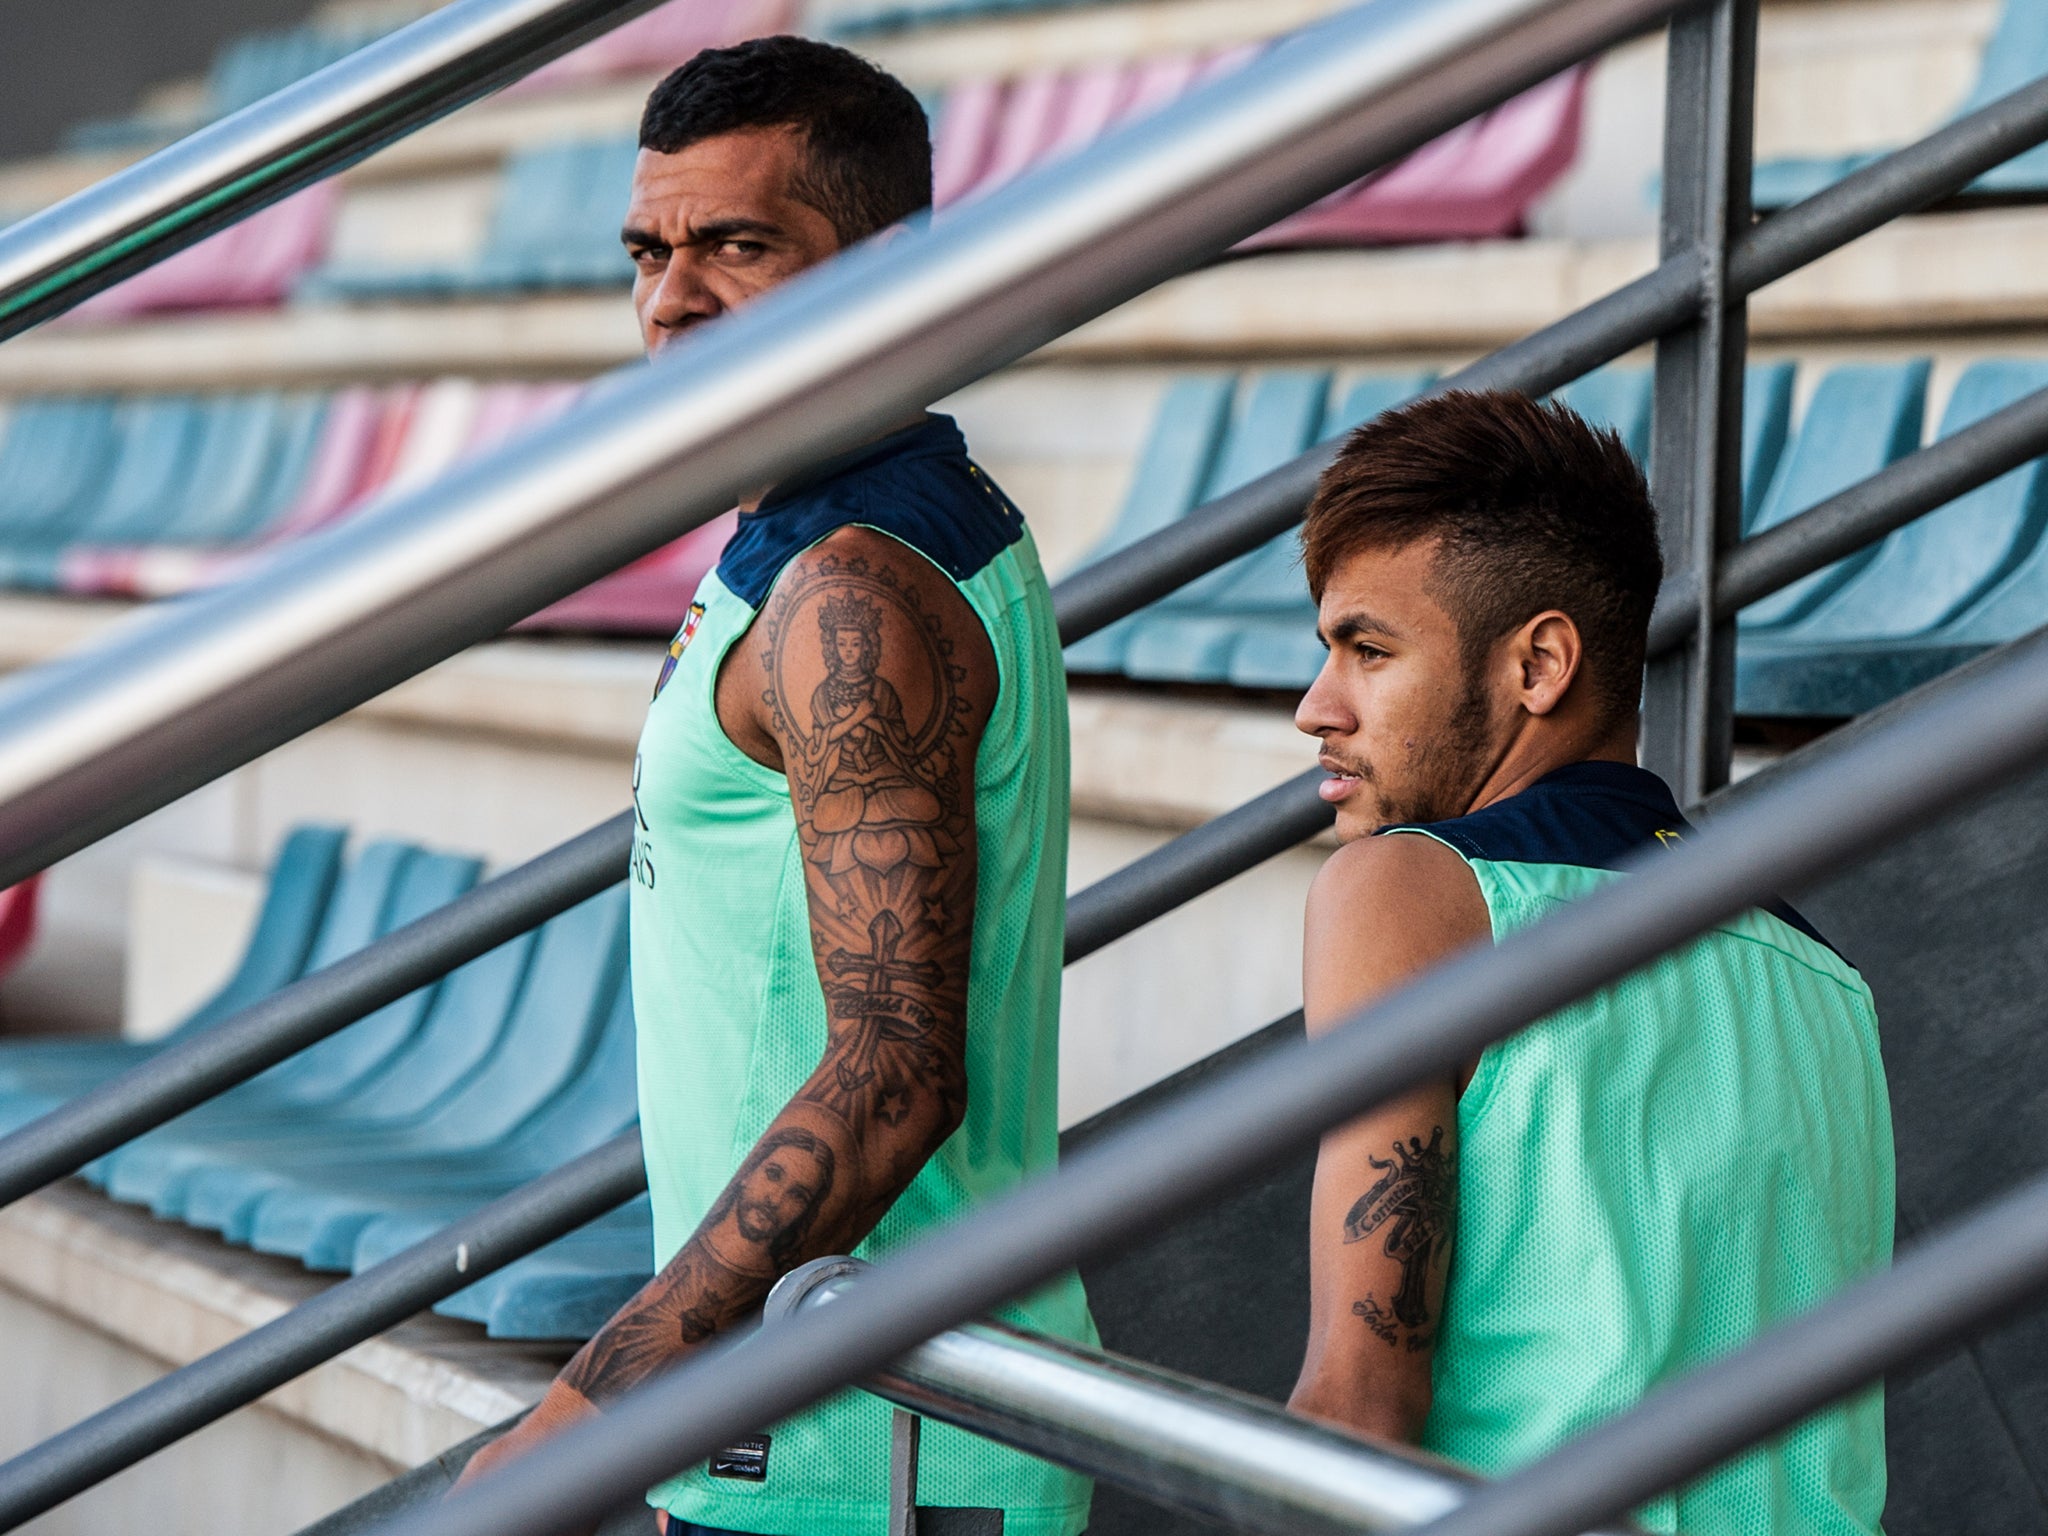 Neymar takes a break with Barcelona team-mate Dani Alves as two observe training from the stands